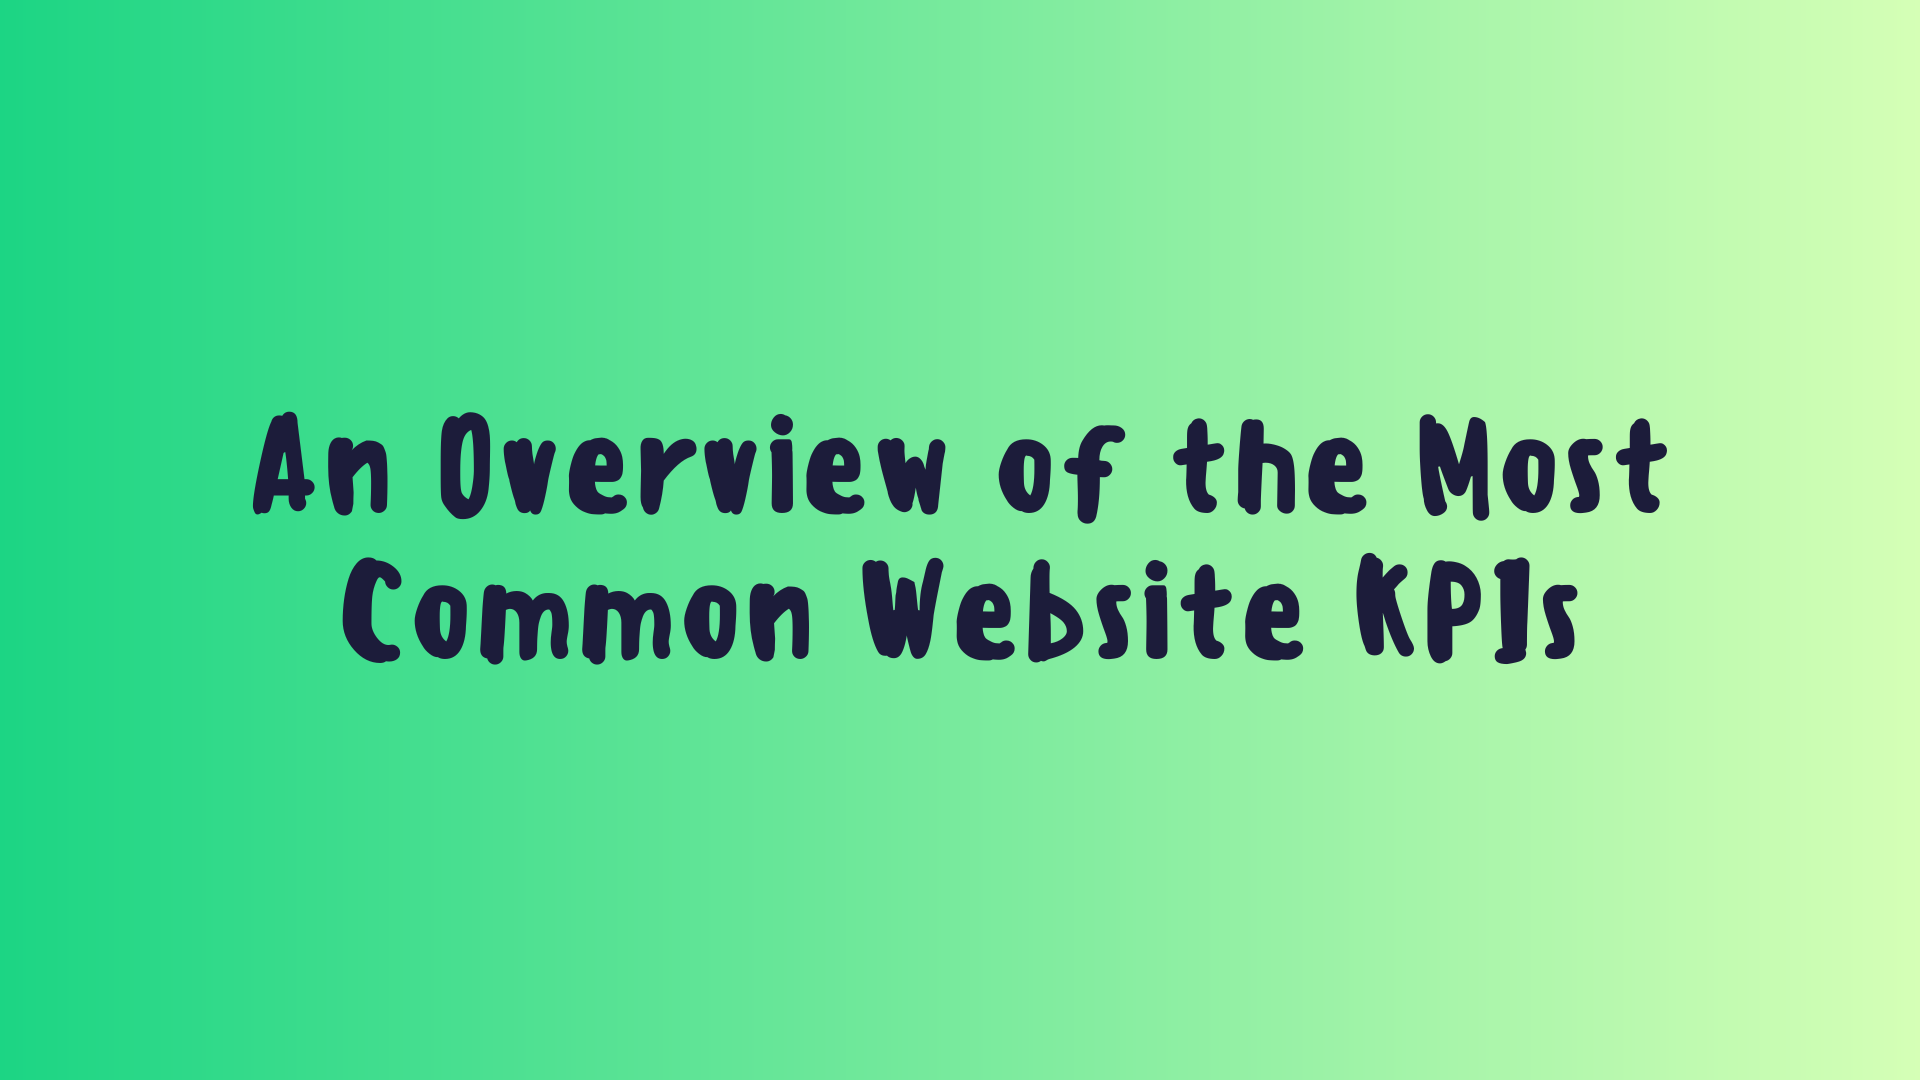 An Overview of the Most Common Website KPIs